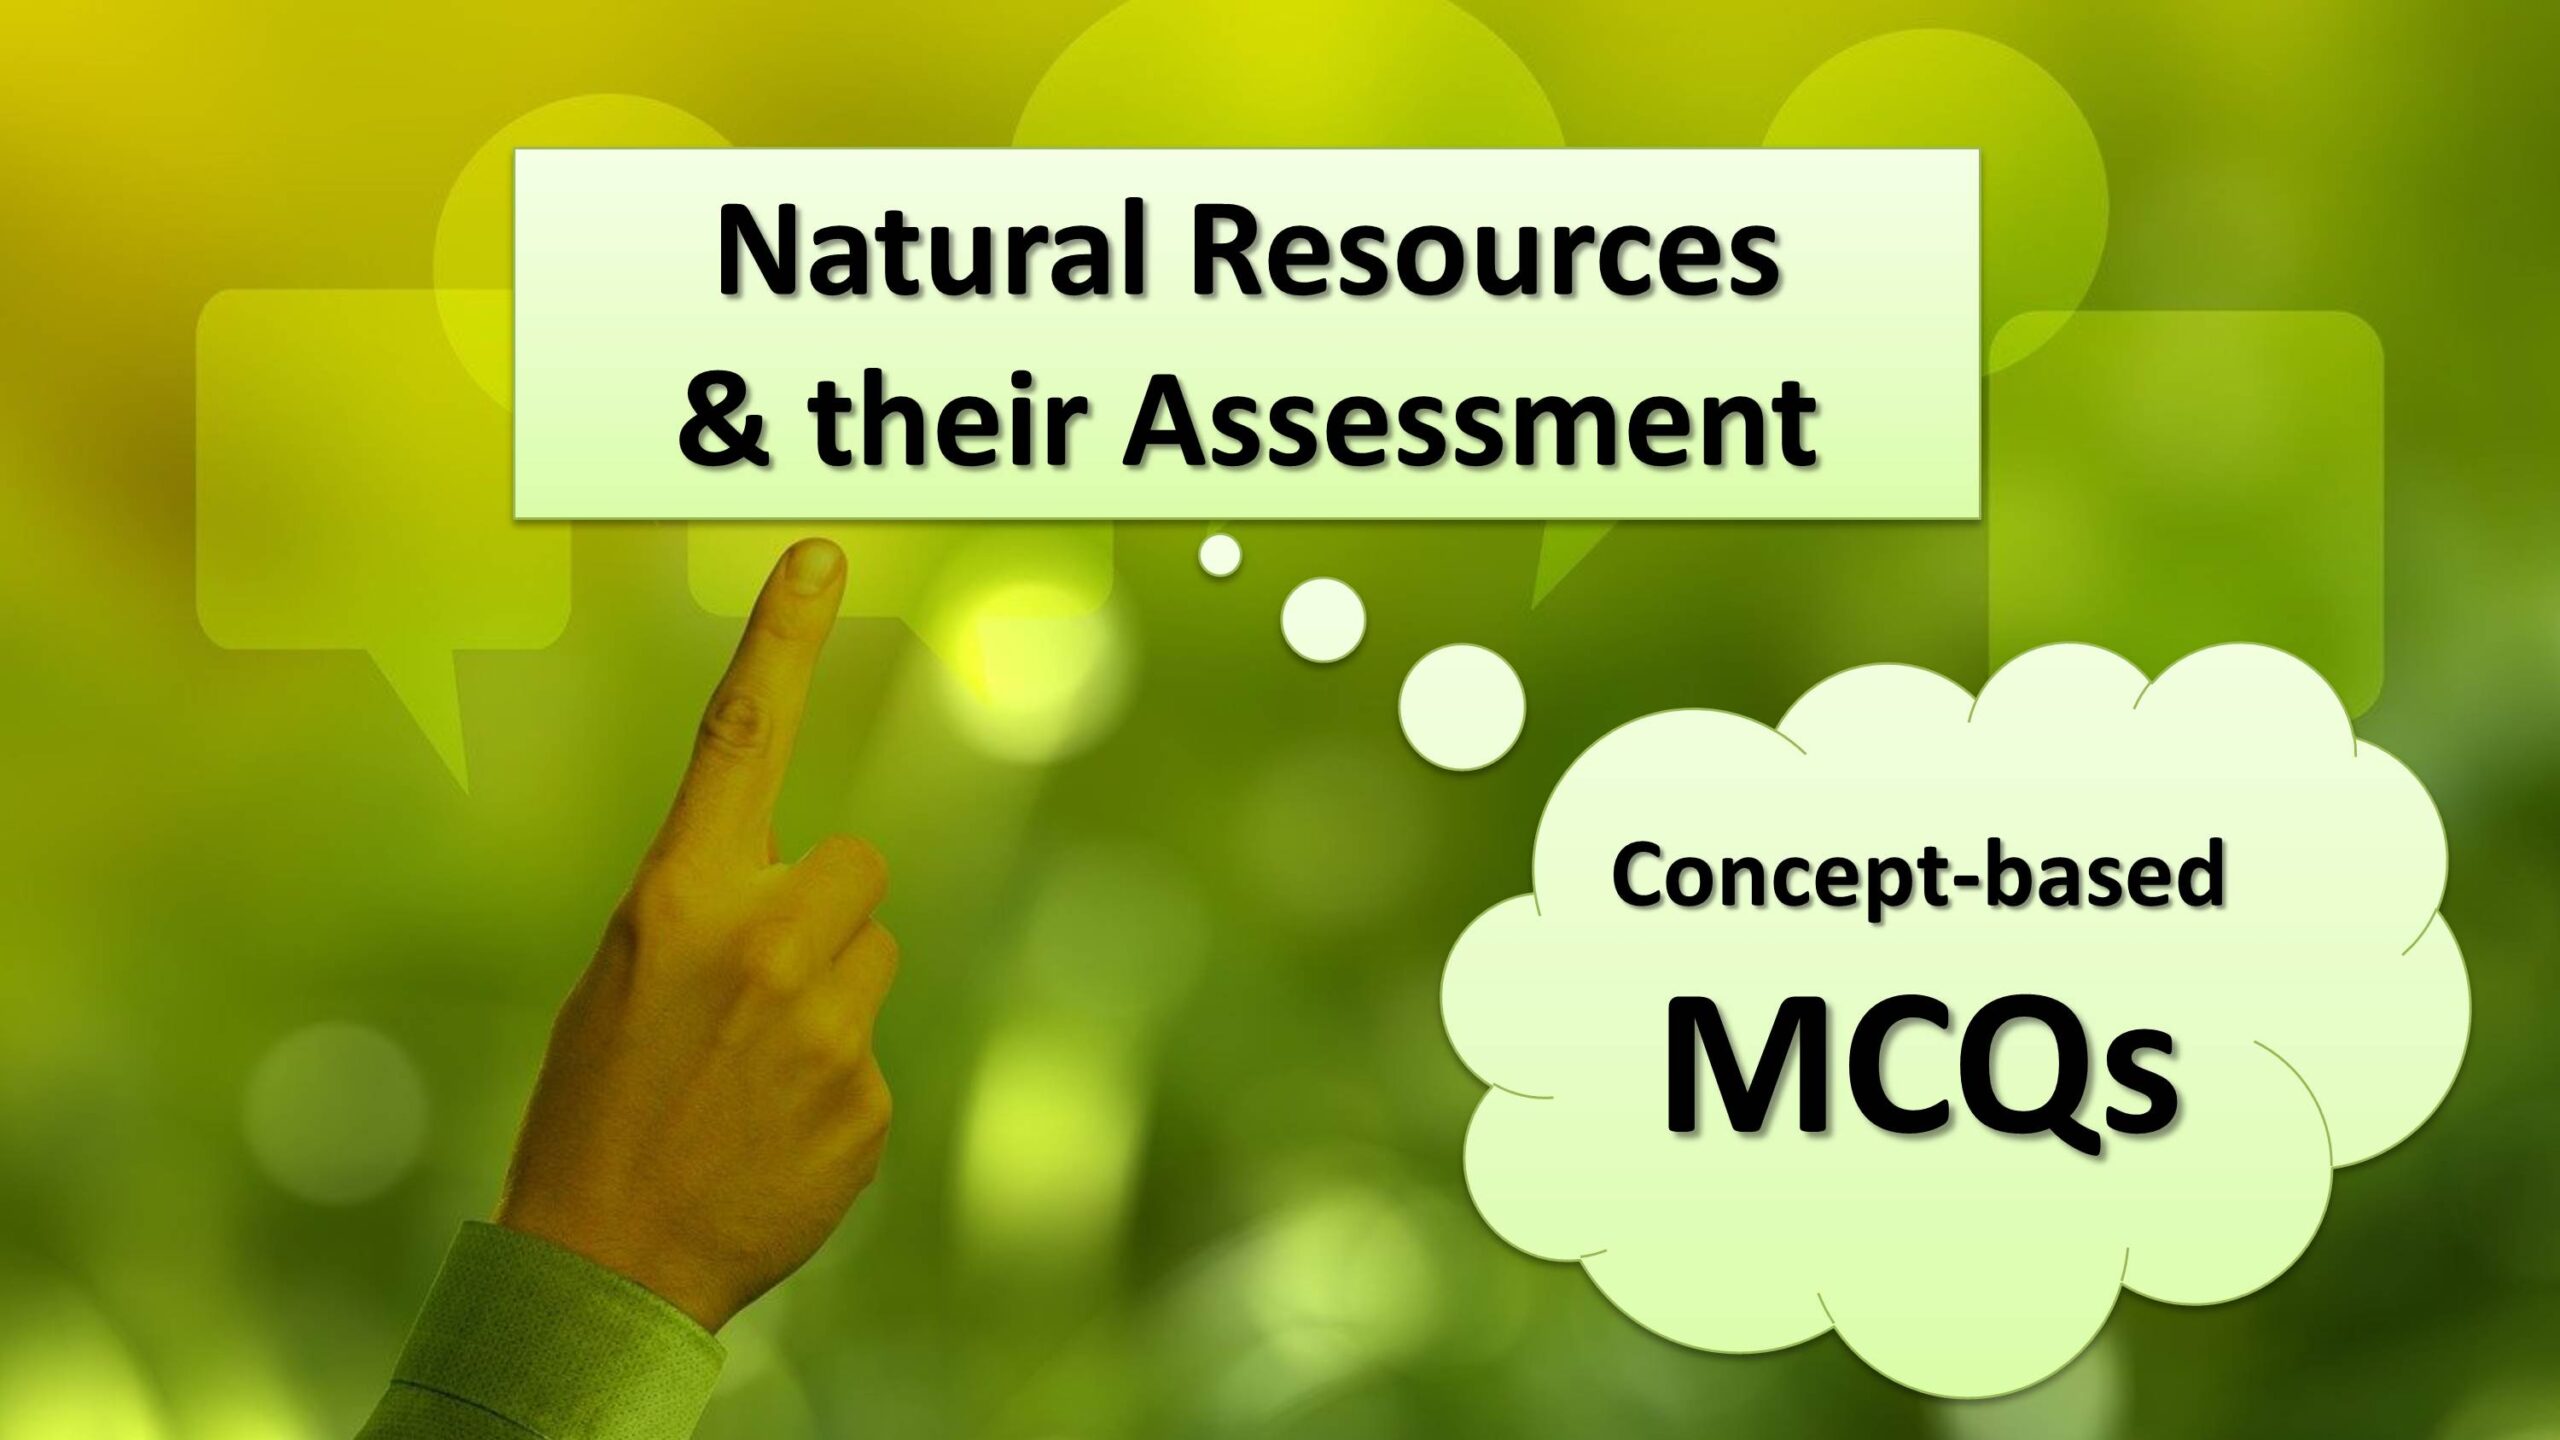 Natural resources and their assessment Important MCQs